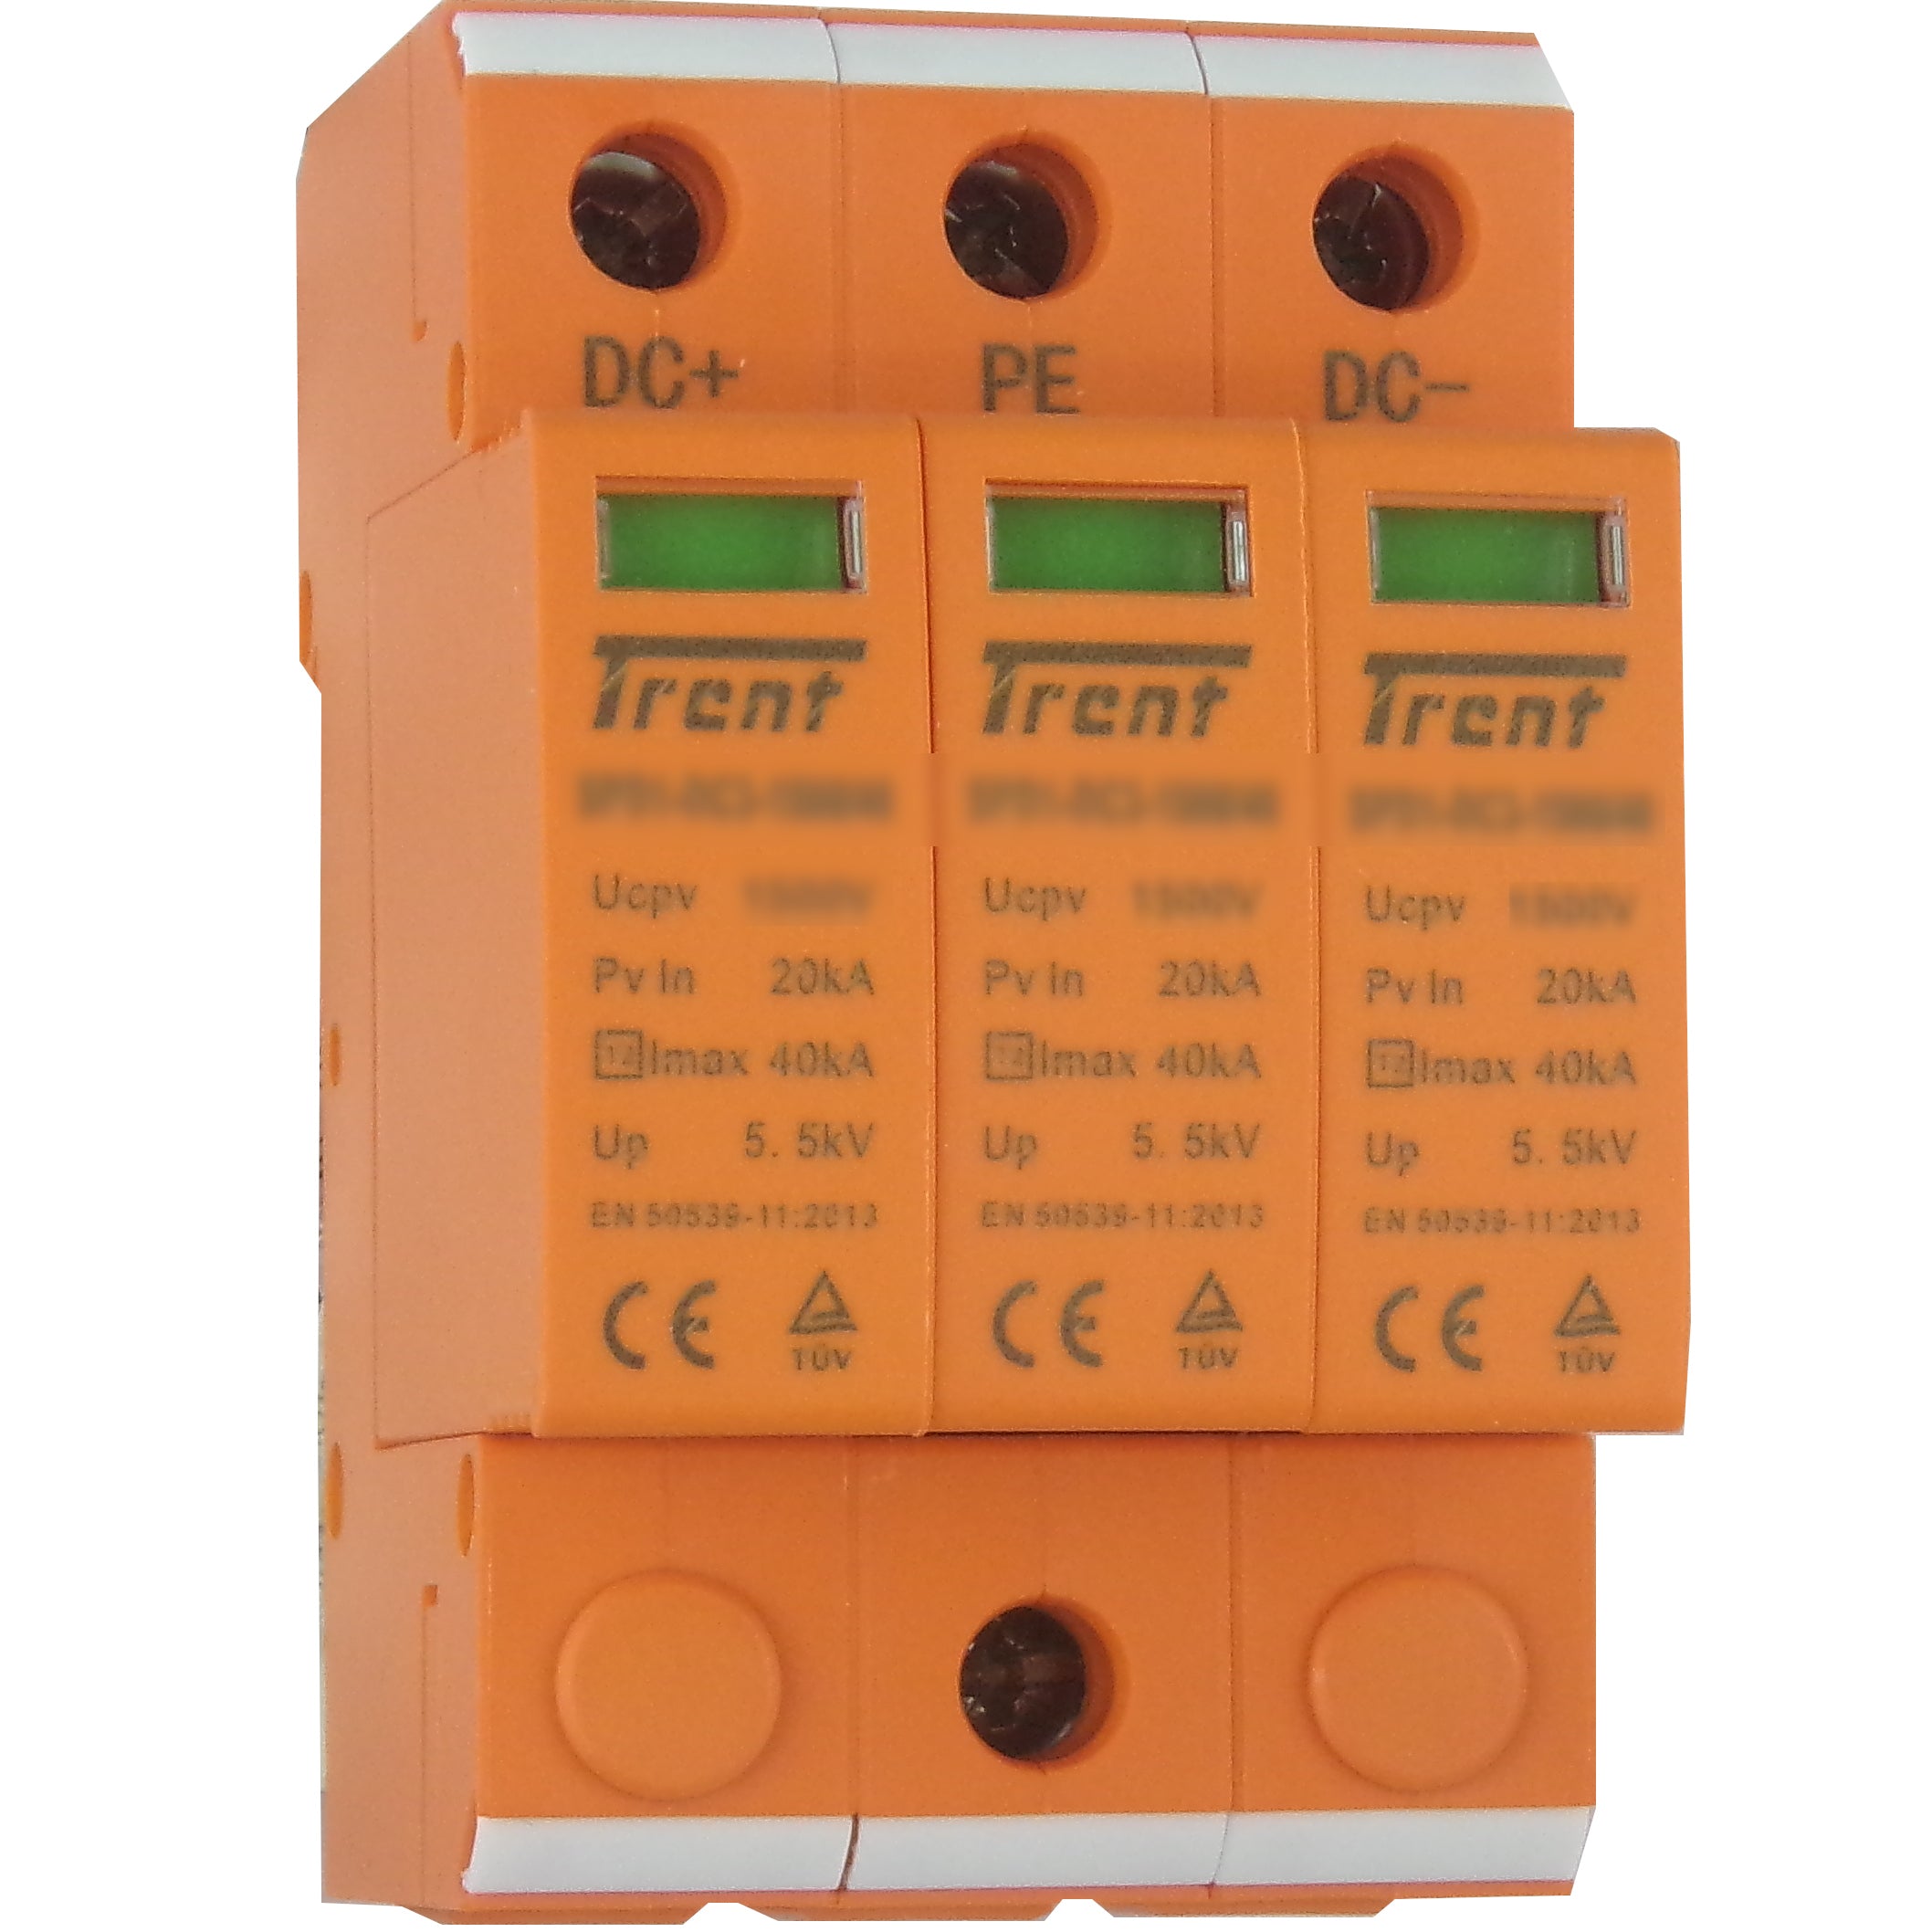 SPD1-DC/3-500/40, 500VDC Surge Protection Device for Photovoltaic Systems, Type 2 40kA